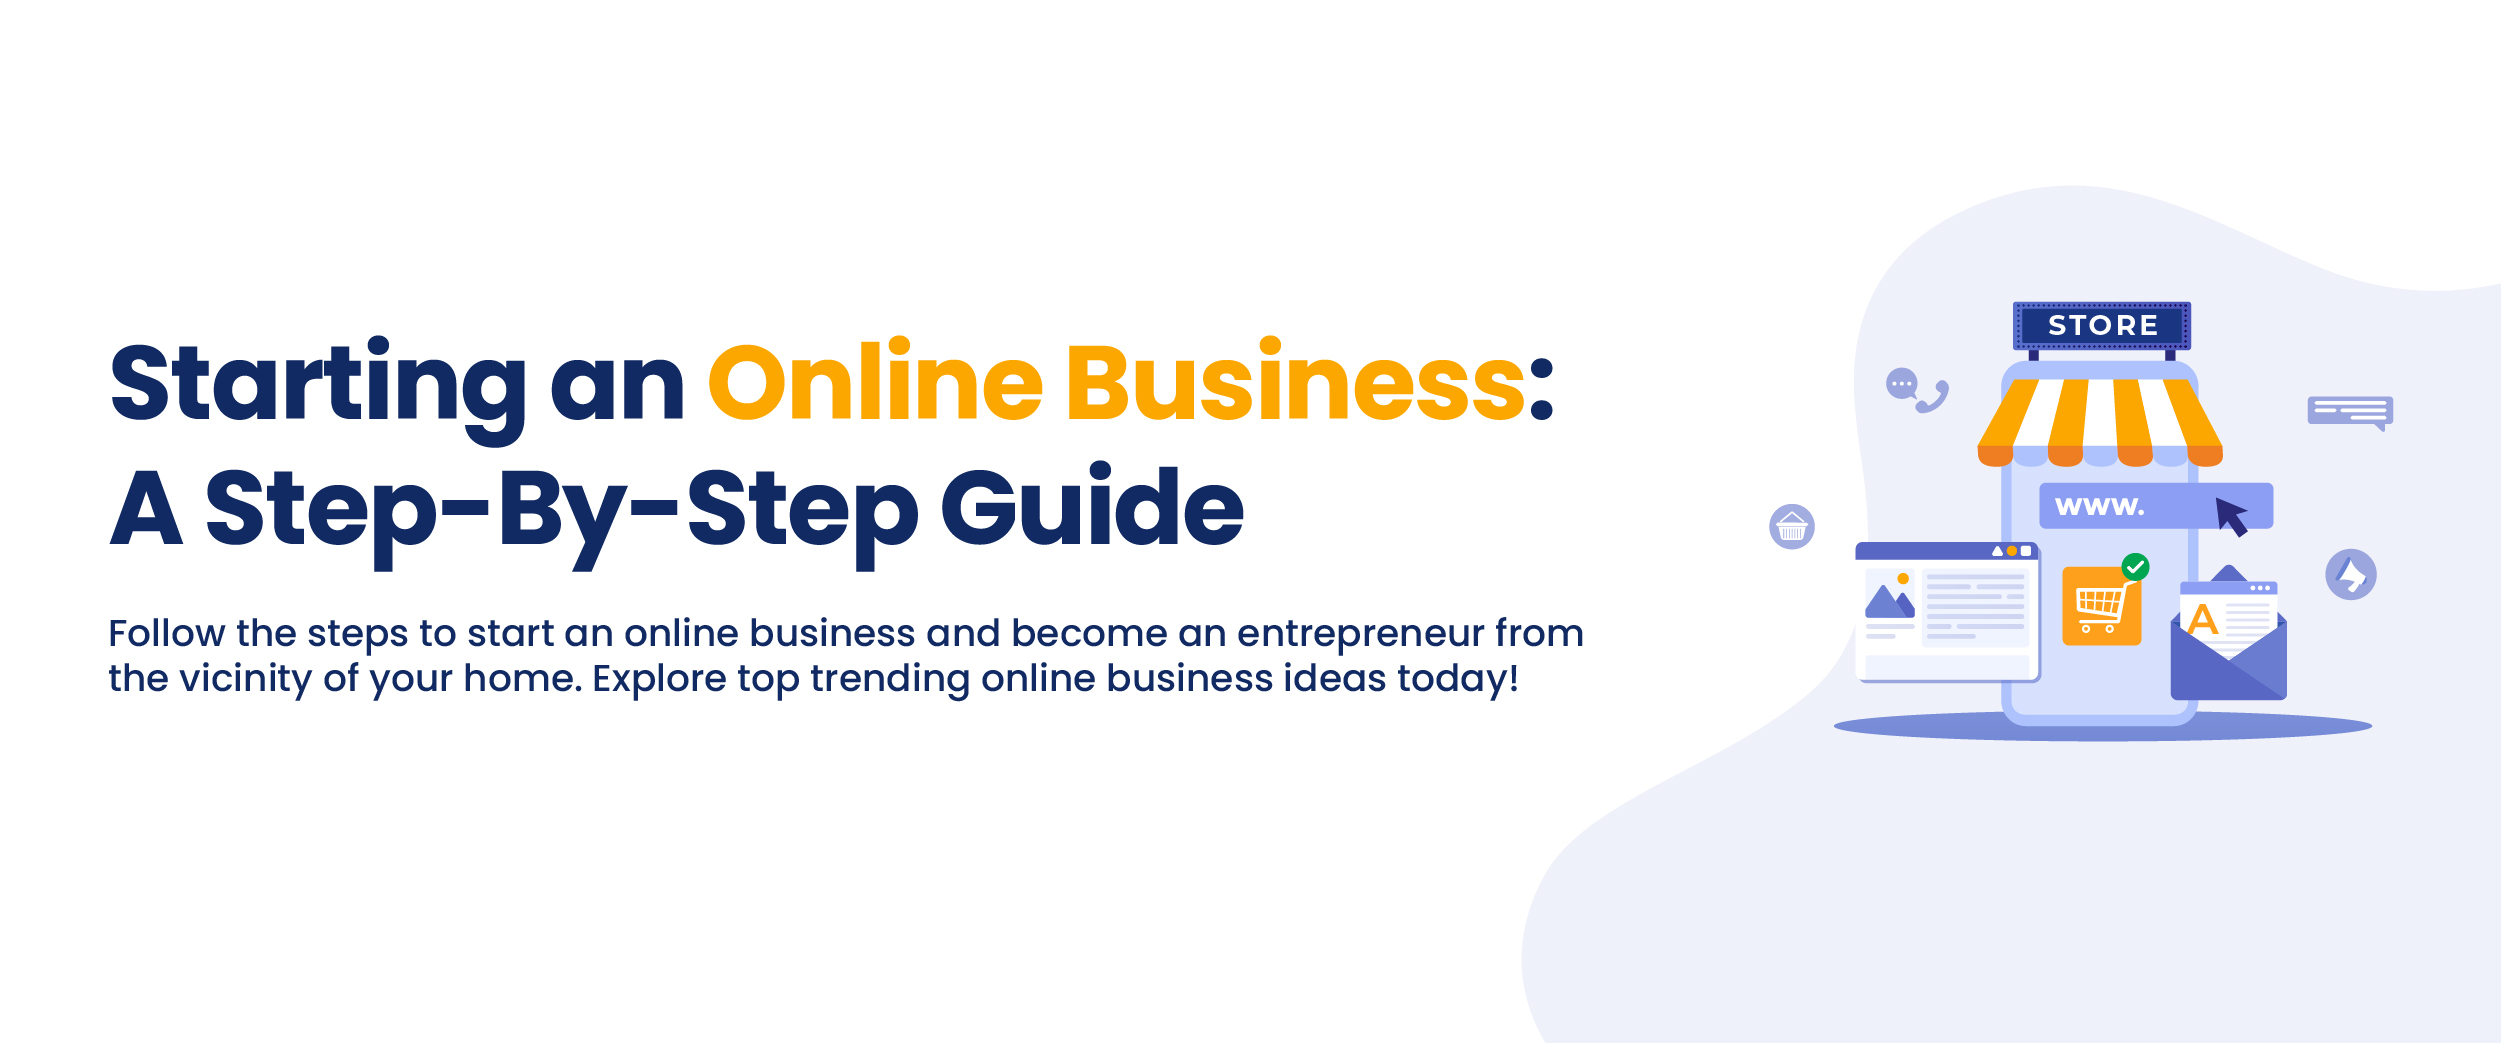 Starting an Online Business- A Step-By-Step Guide